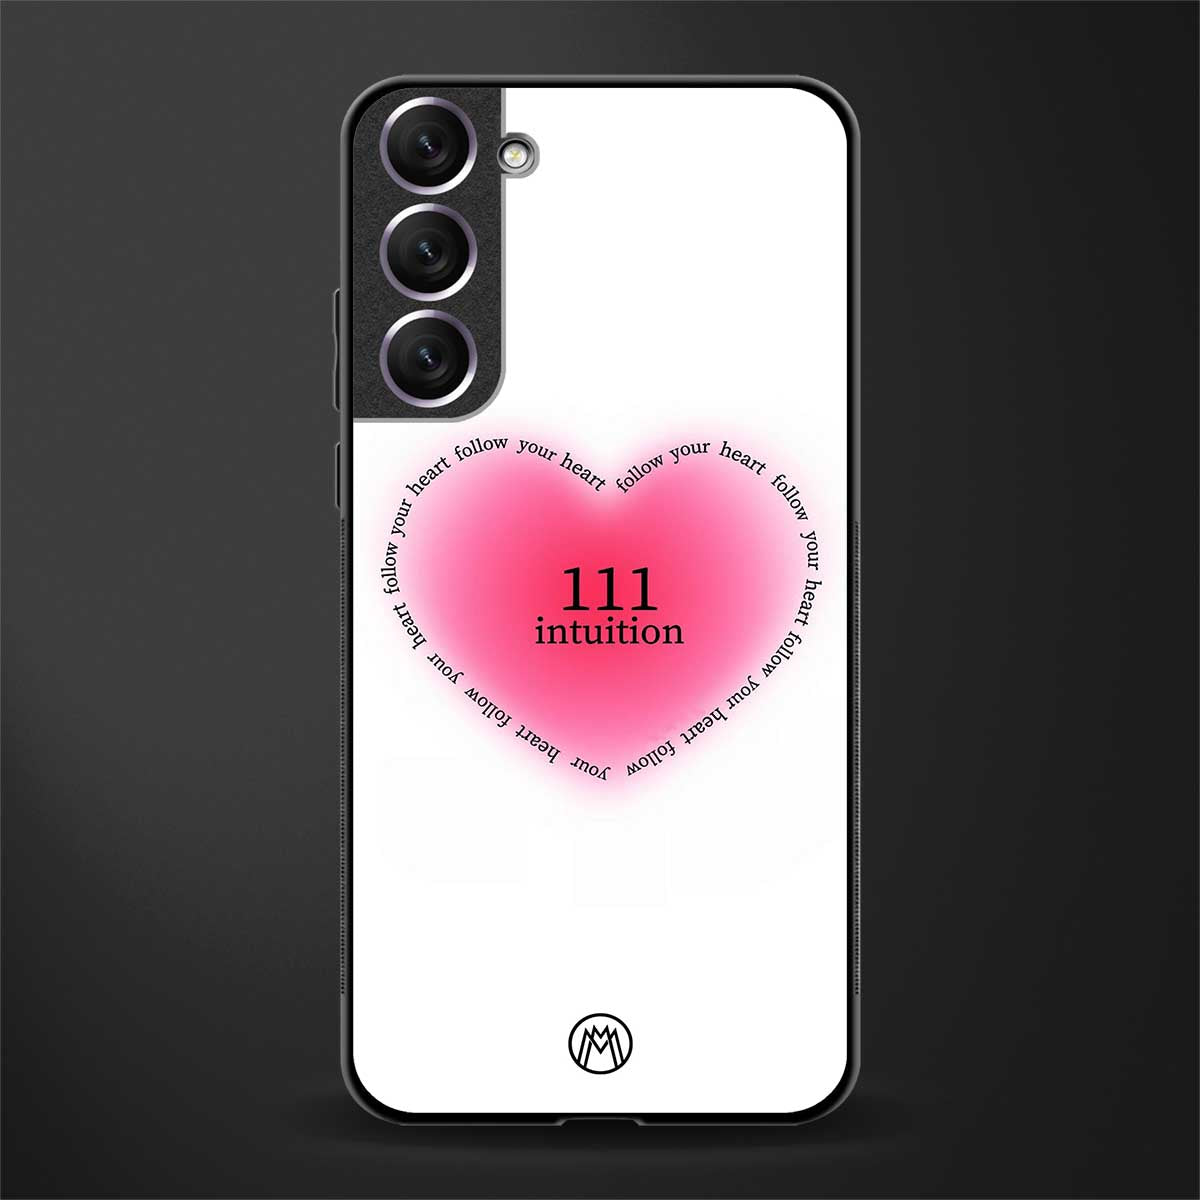 111 intuition glass case for samsung galaxy s21 plus image